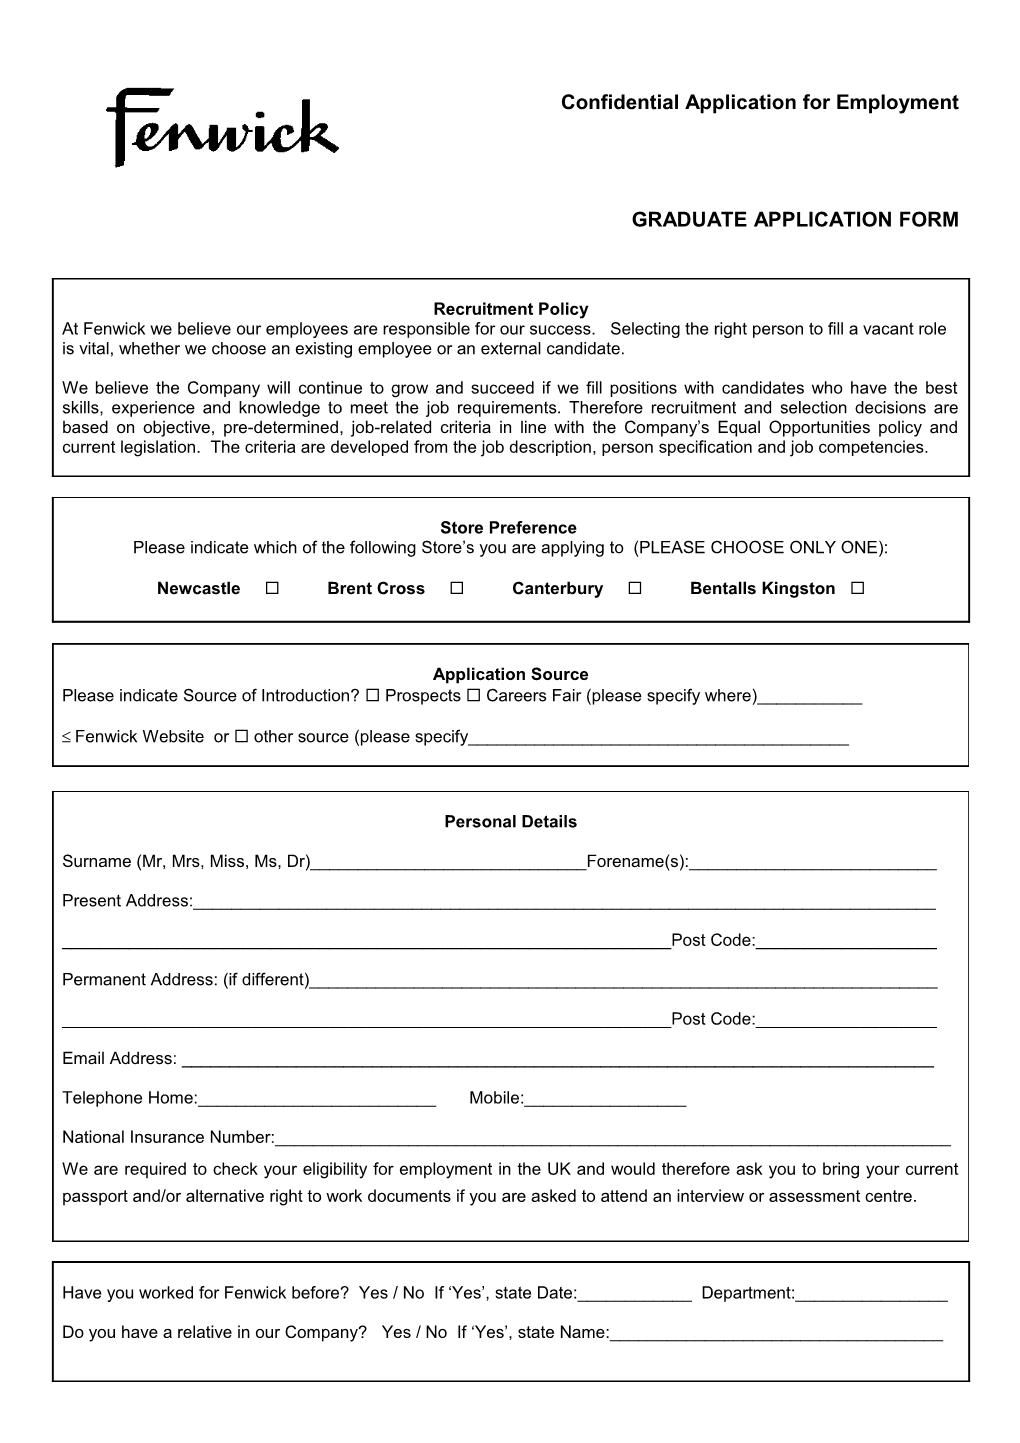 Confidential Application for Employment